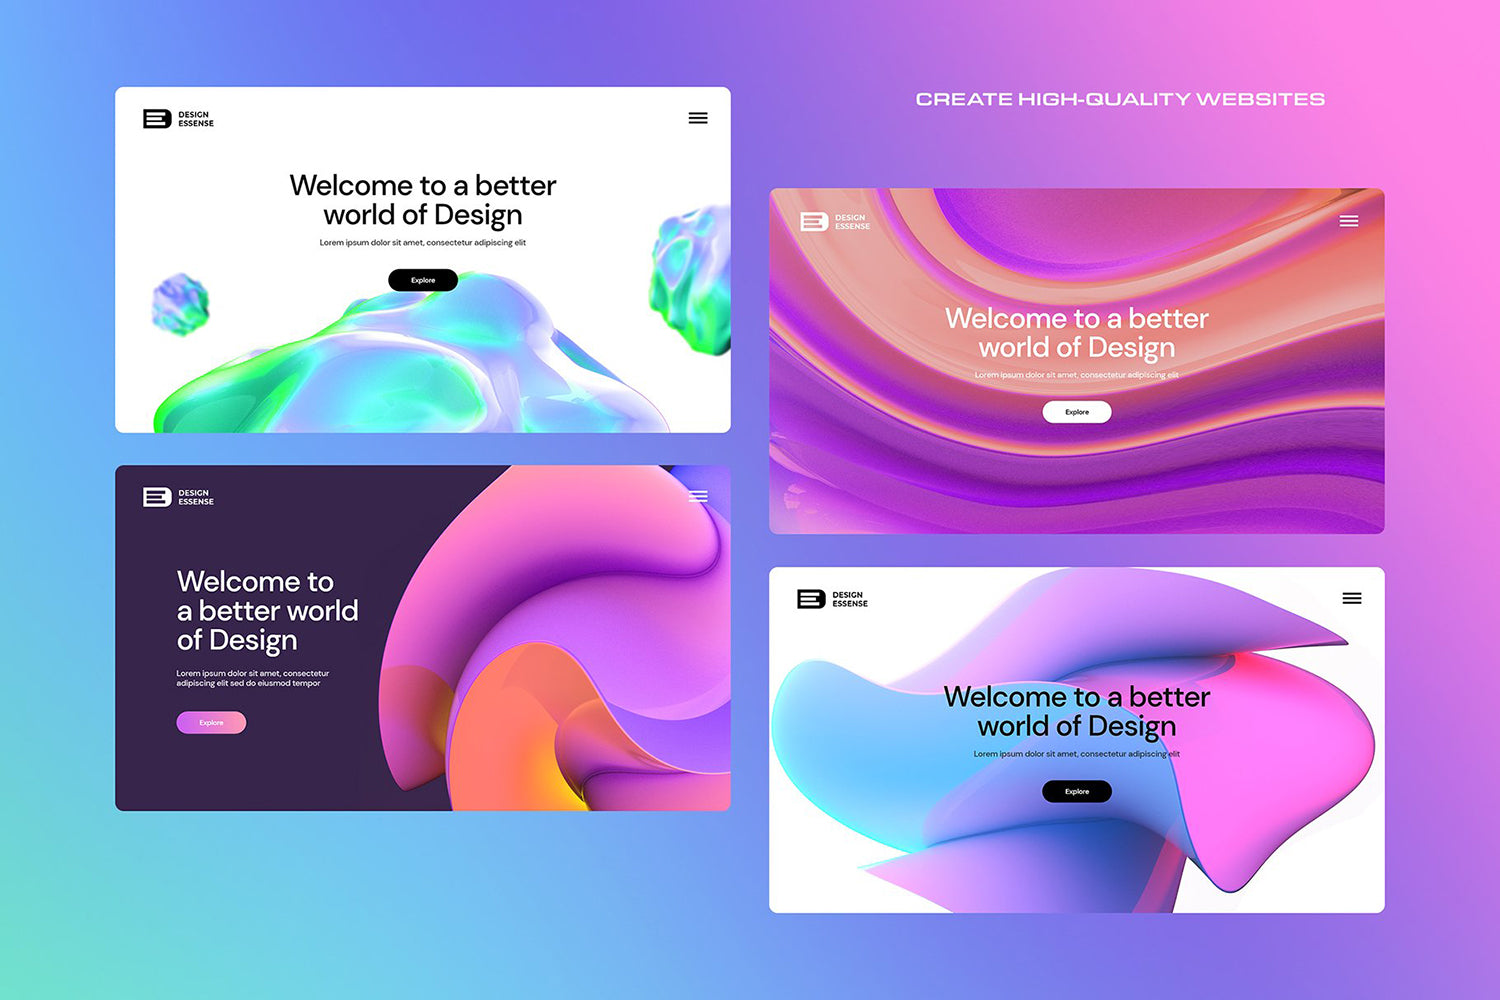 3D Gradient Abstract Shapes